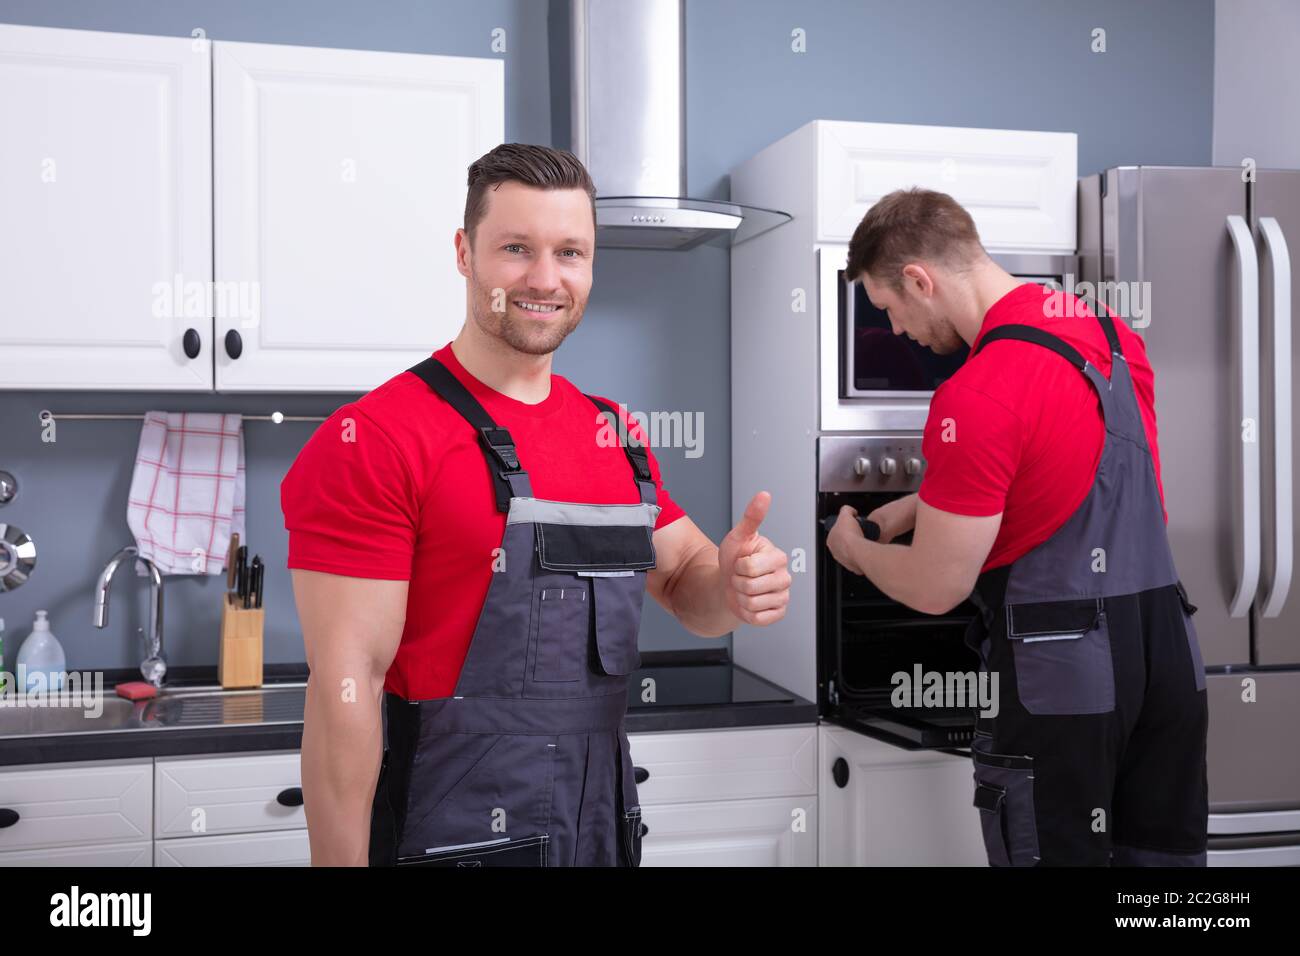 Delivery Install Refrigerator Appliance Mover Carrying Fridge Stock Photo  by ©AndreyPopov 663312874